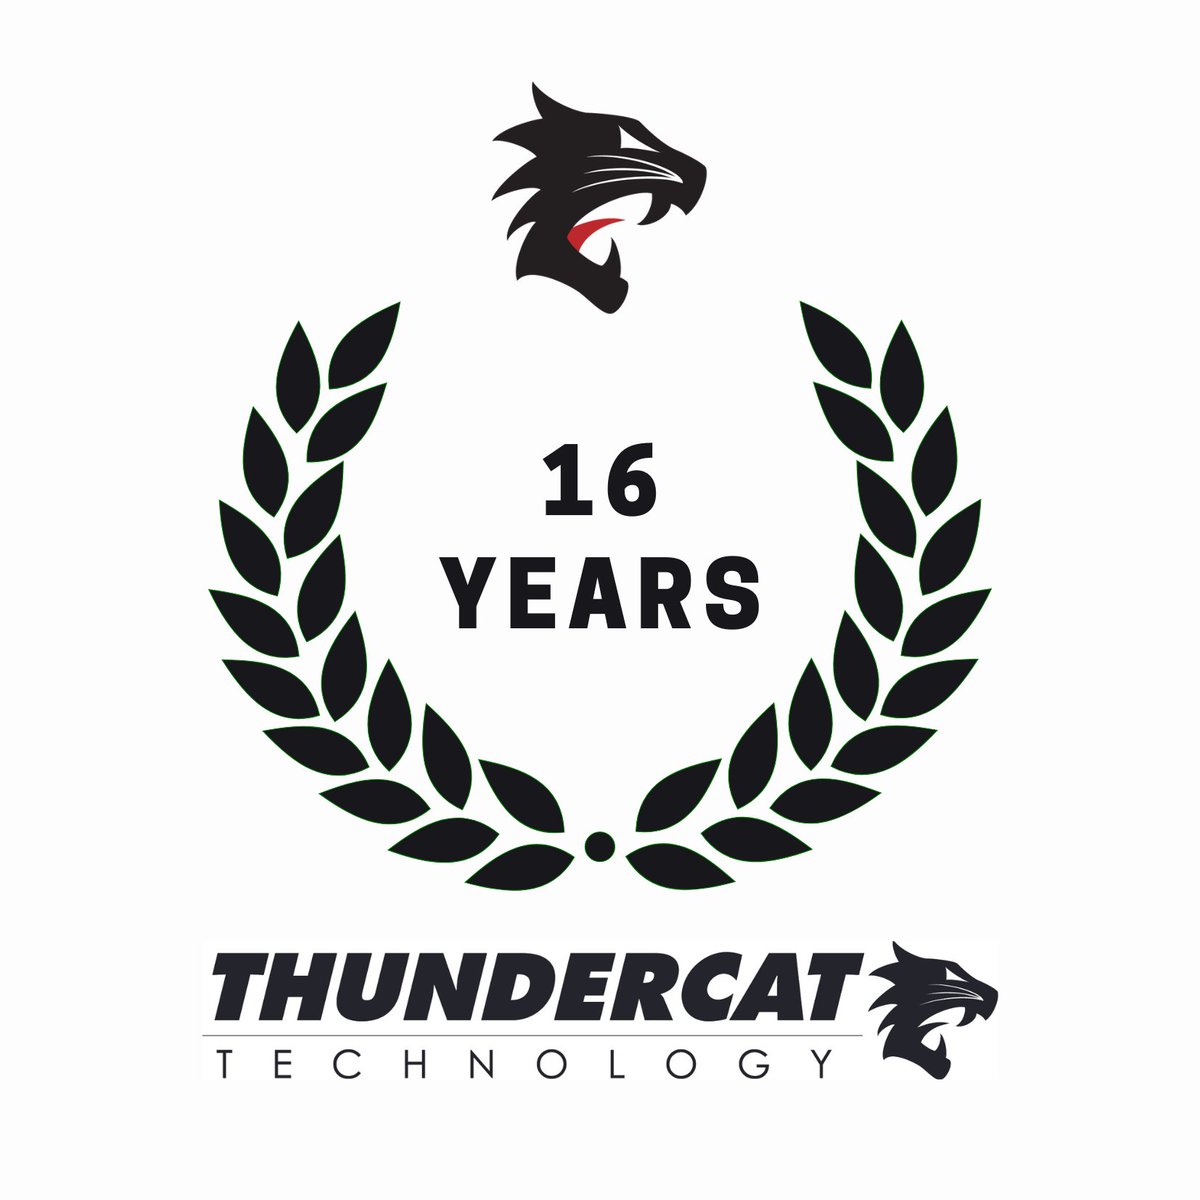 We're NO FOOLS! ThunderCat Technology turns 16 today - Happy Anniversary 4/1/2008. A huge thanks to our employees, partners, and customers.